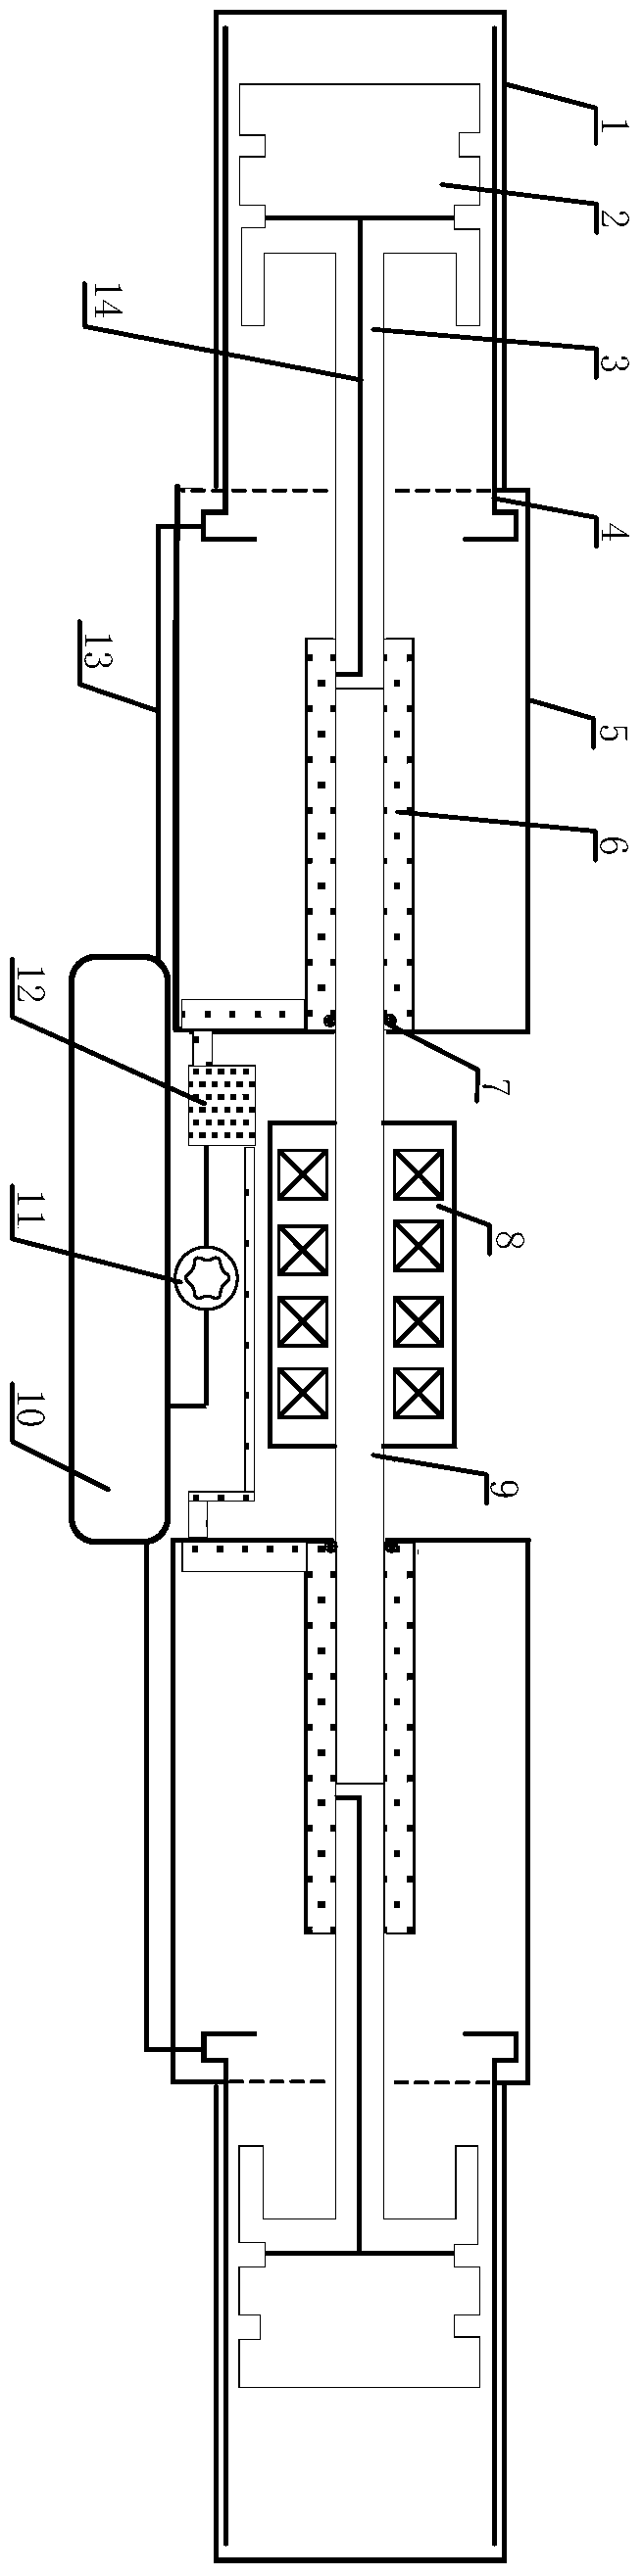 A pressure lubrication system for a free-piston internal combustion generator